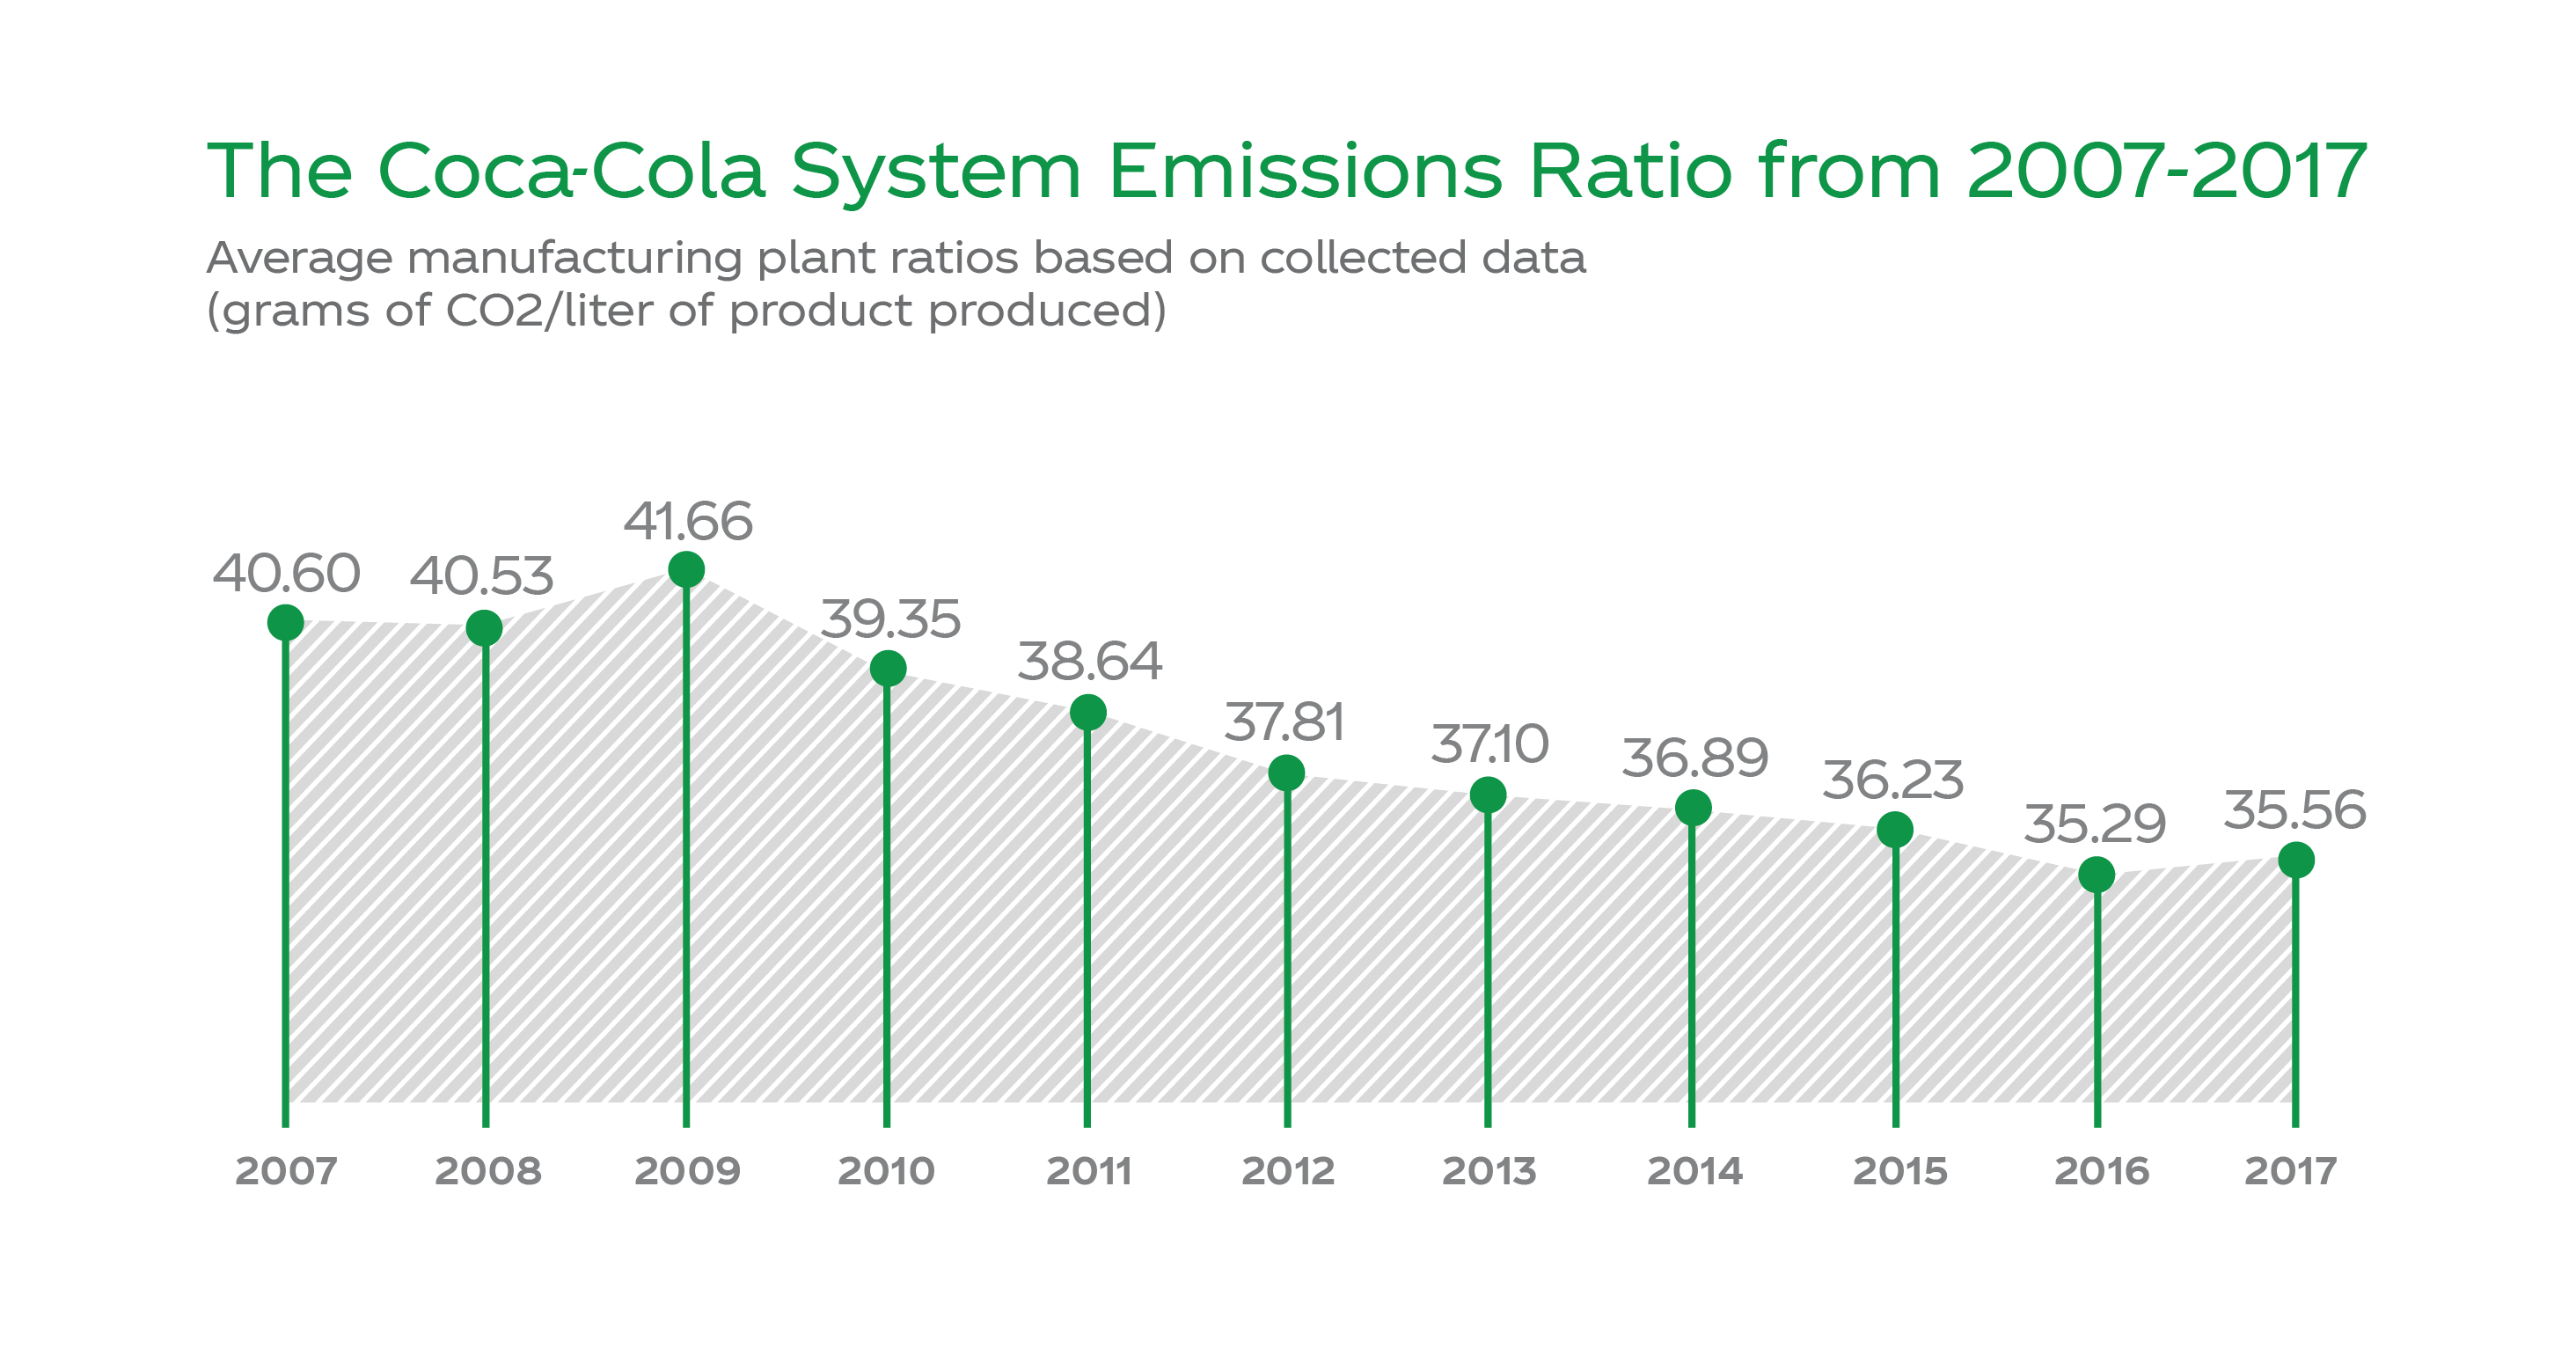 The Coca-Cola System Emissions Ration from 2007-2017